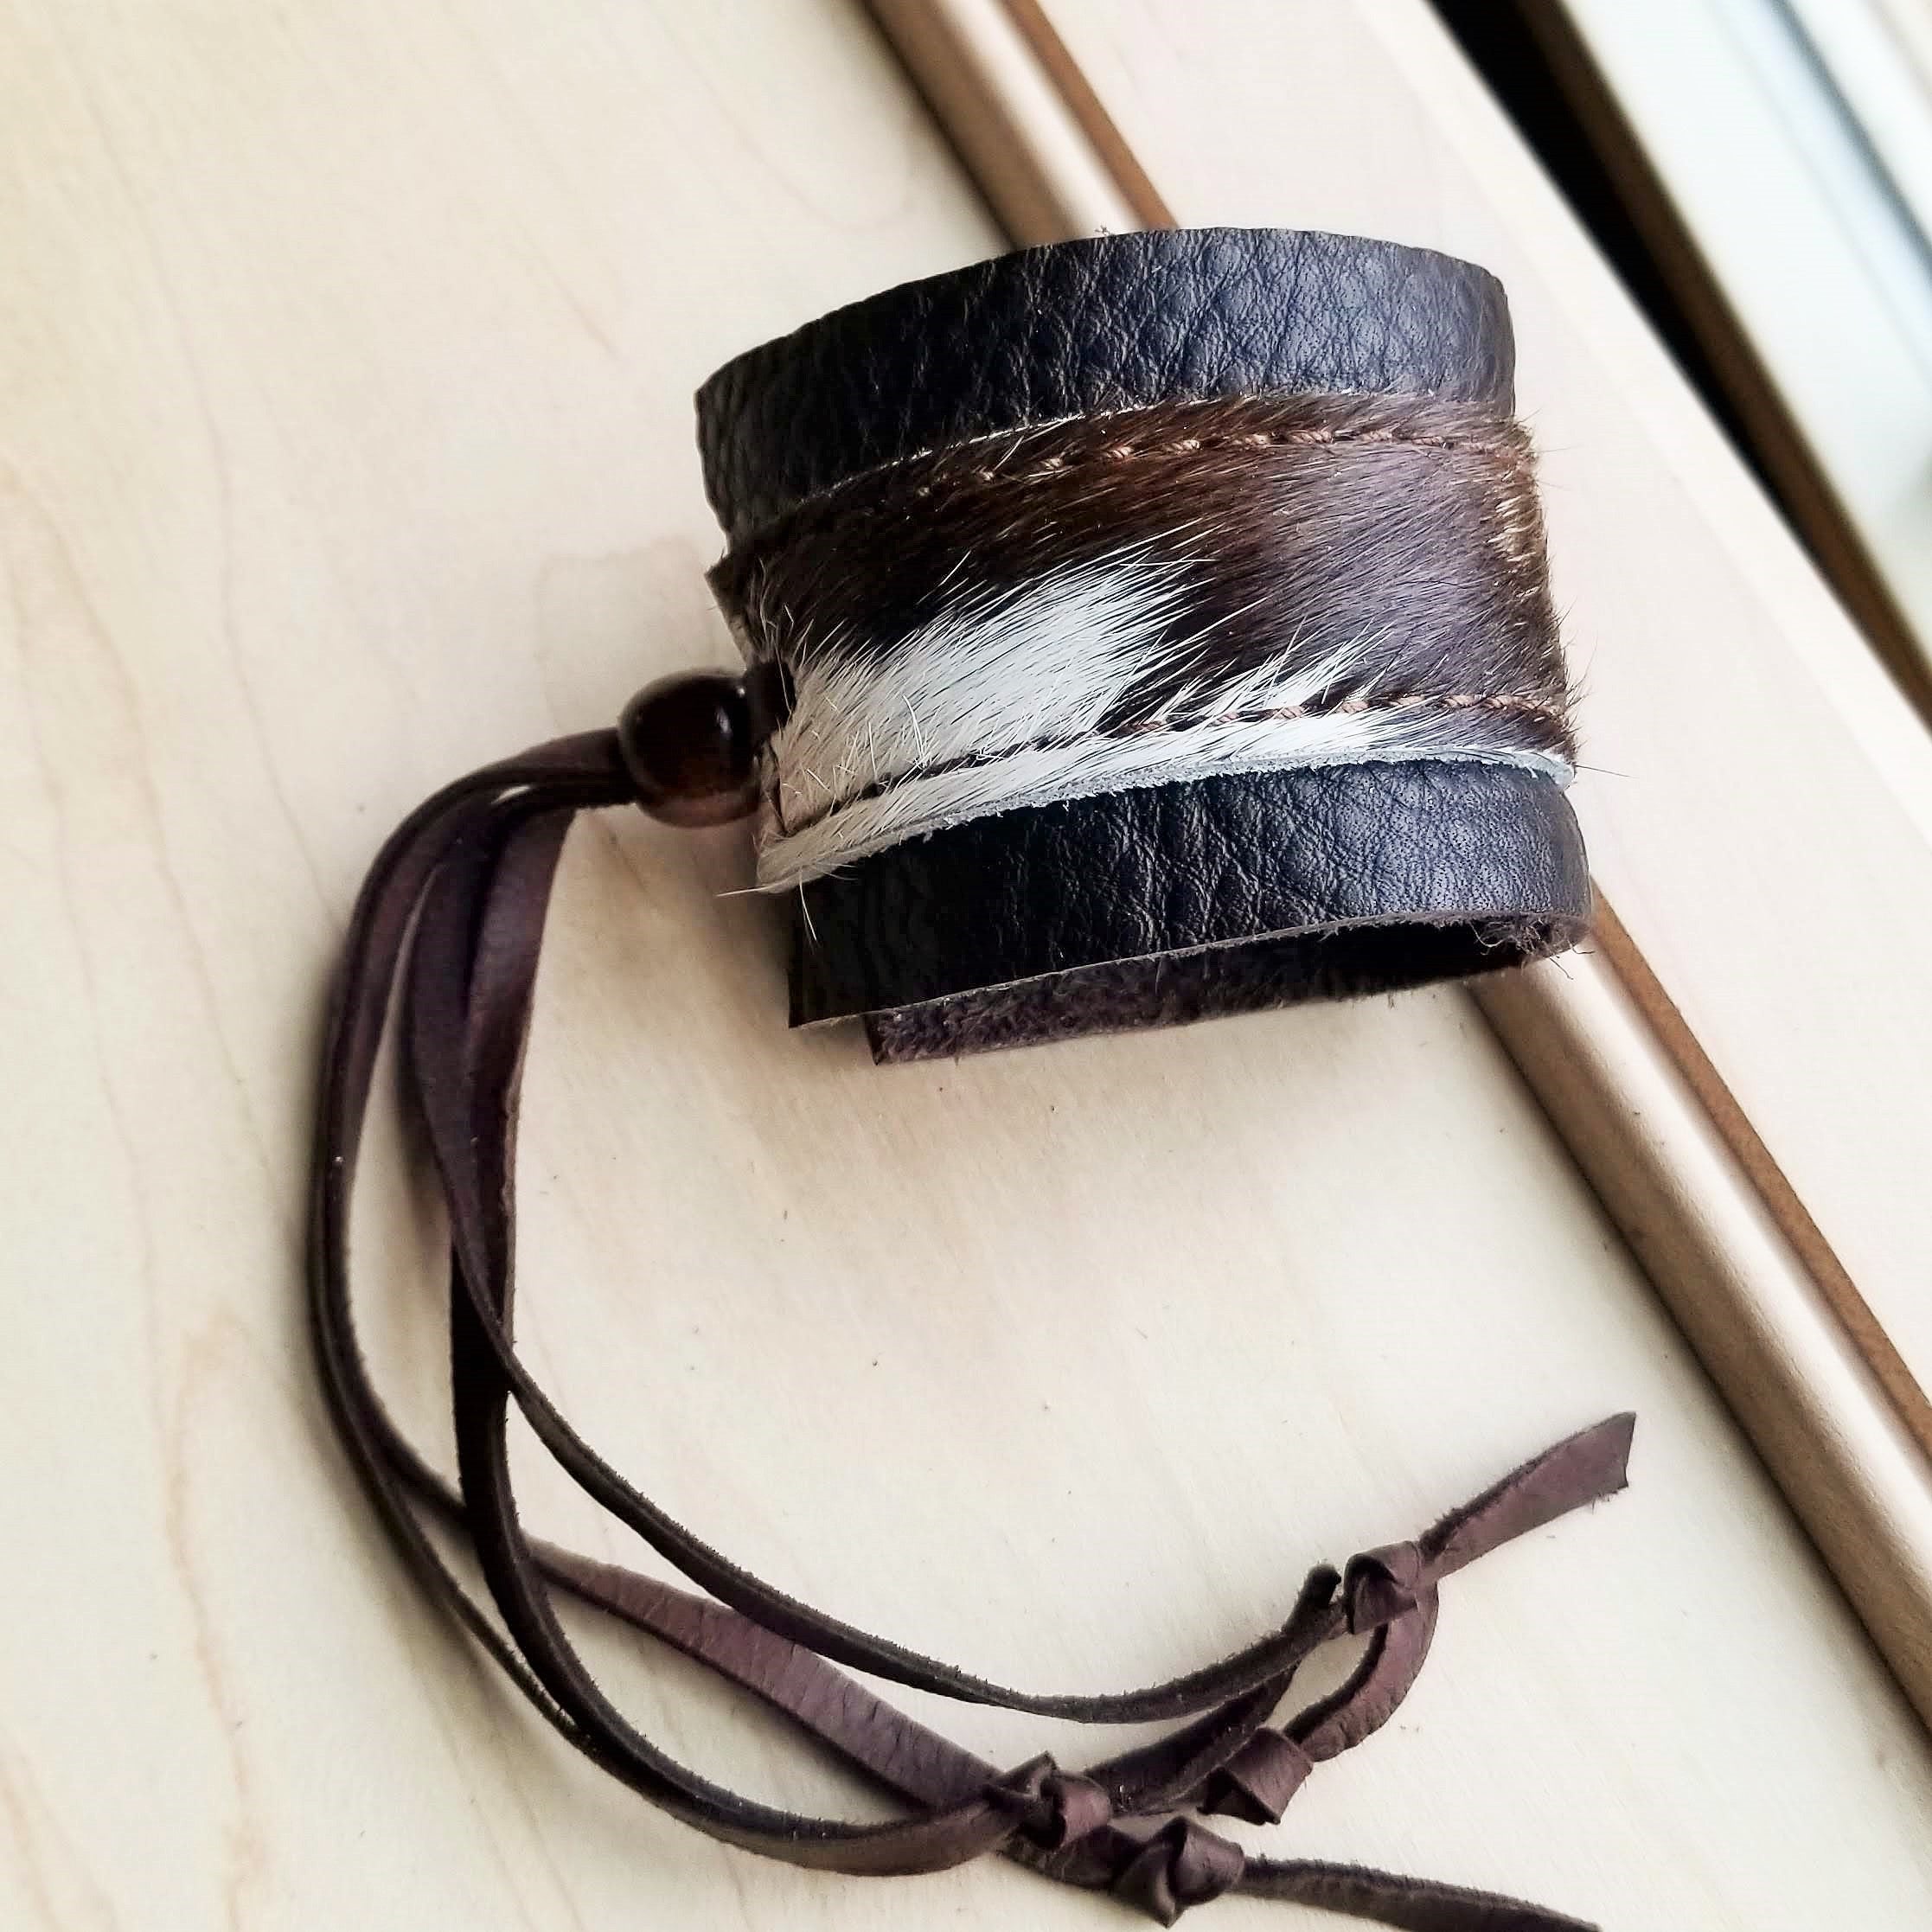 Leather Cuff with Adjustable Leather Tie